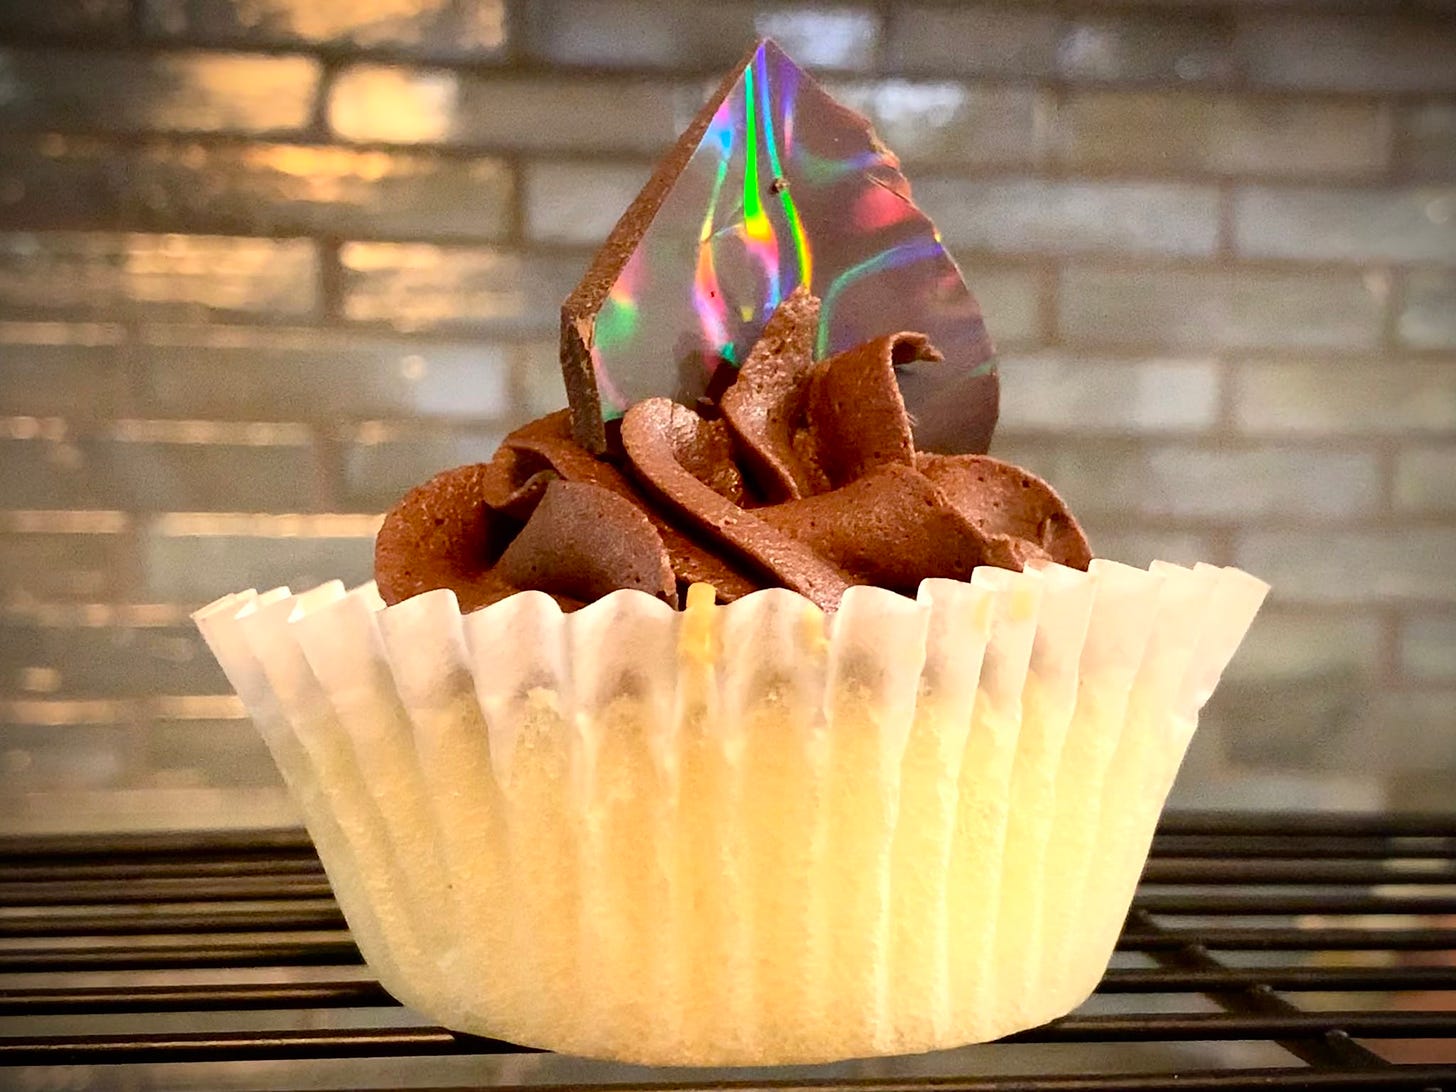 Cupcake with chocolate buttercream and a rainbow chocolate shard topper